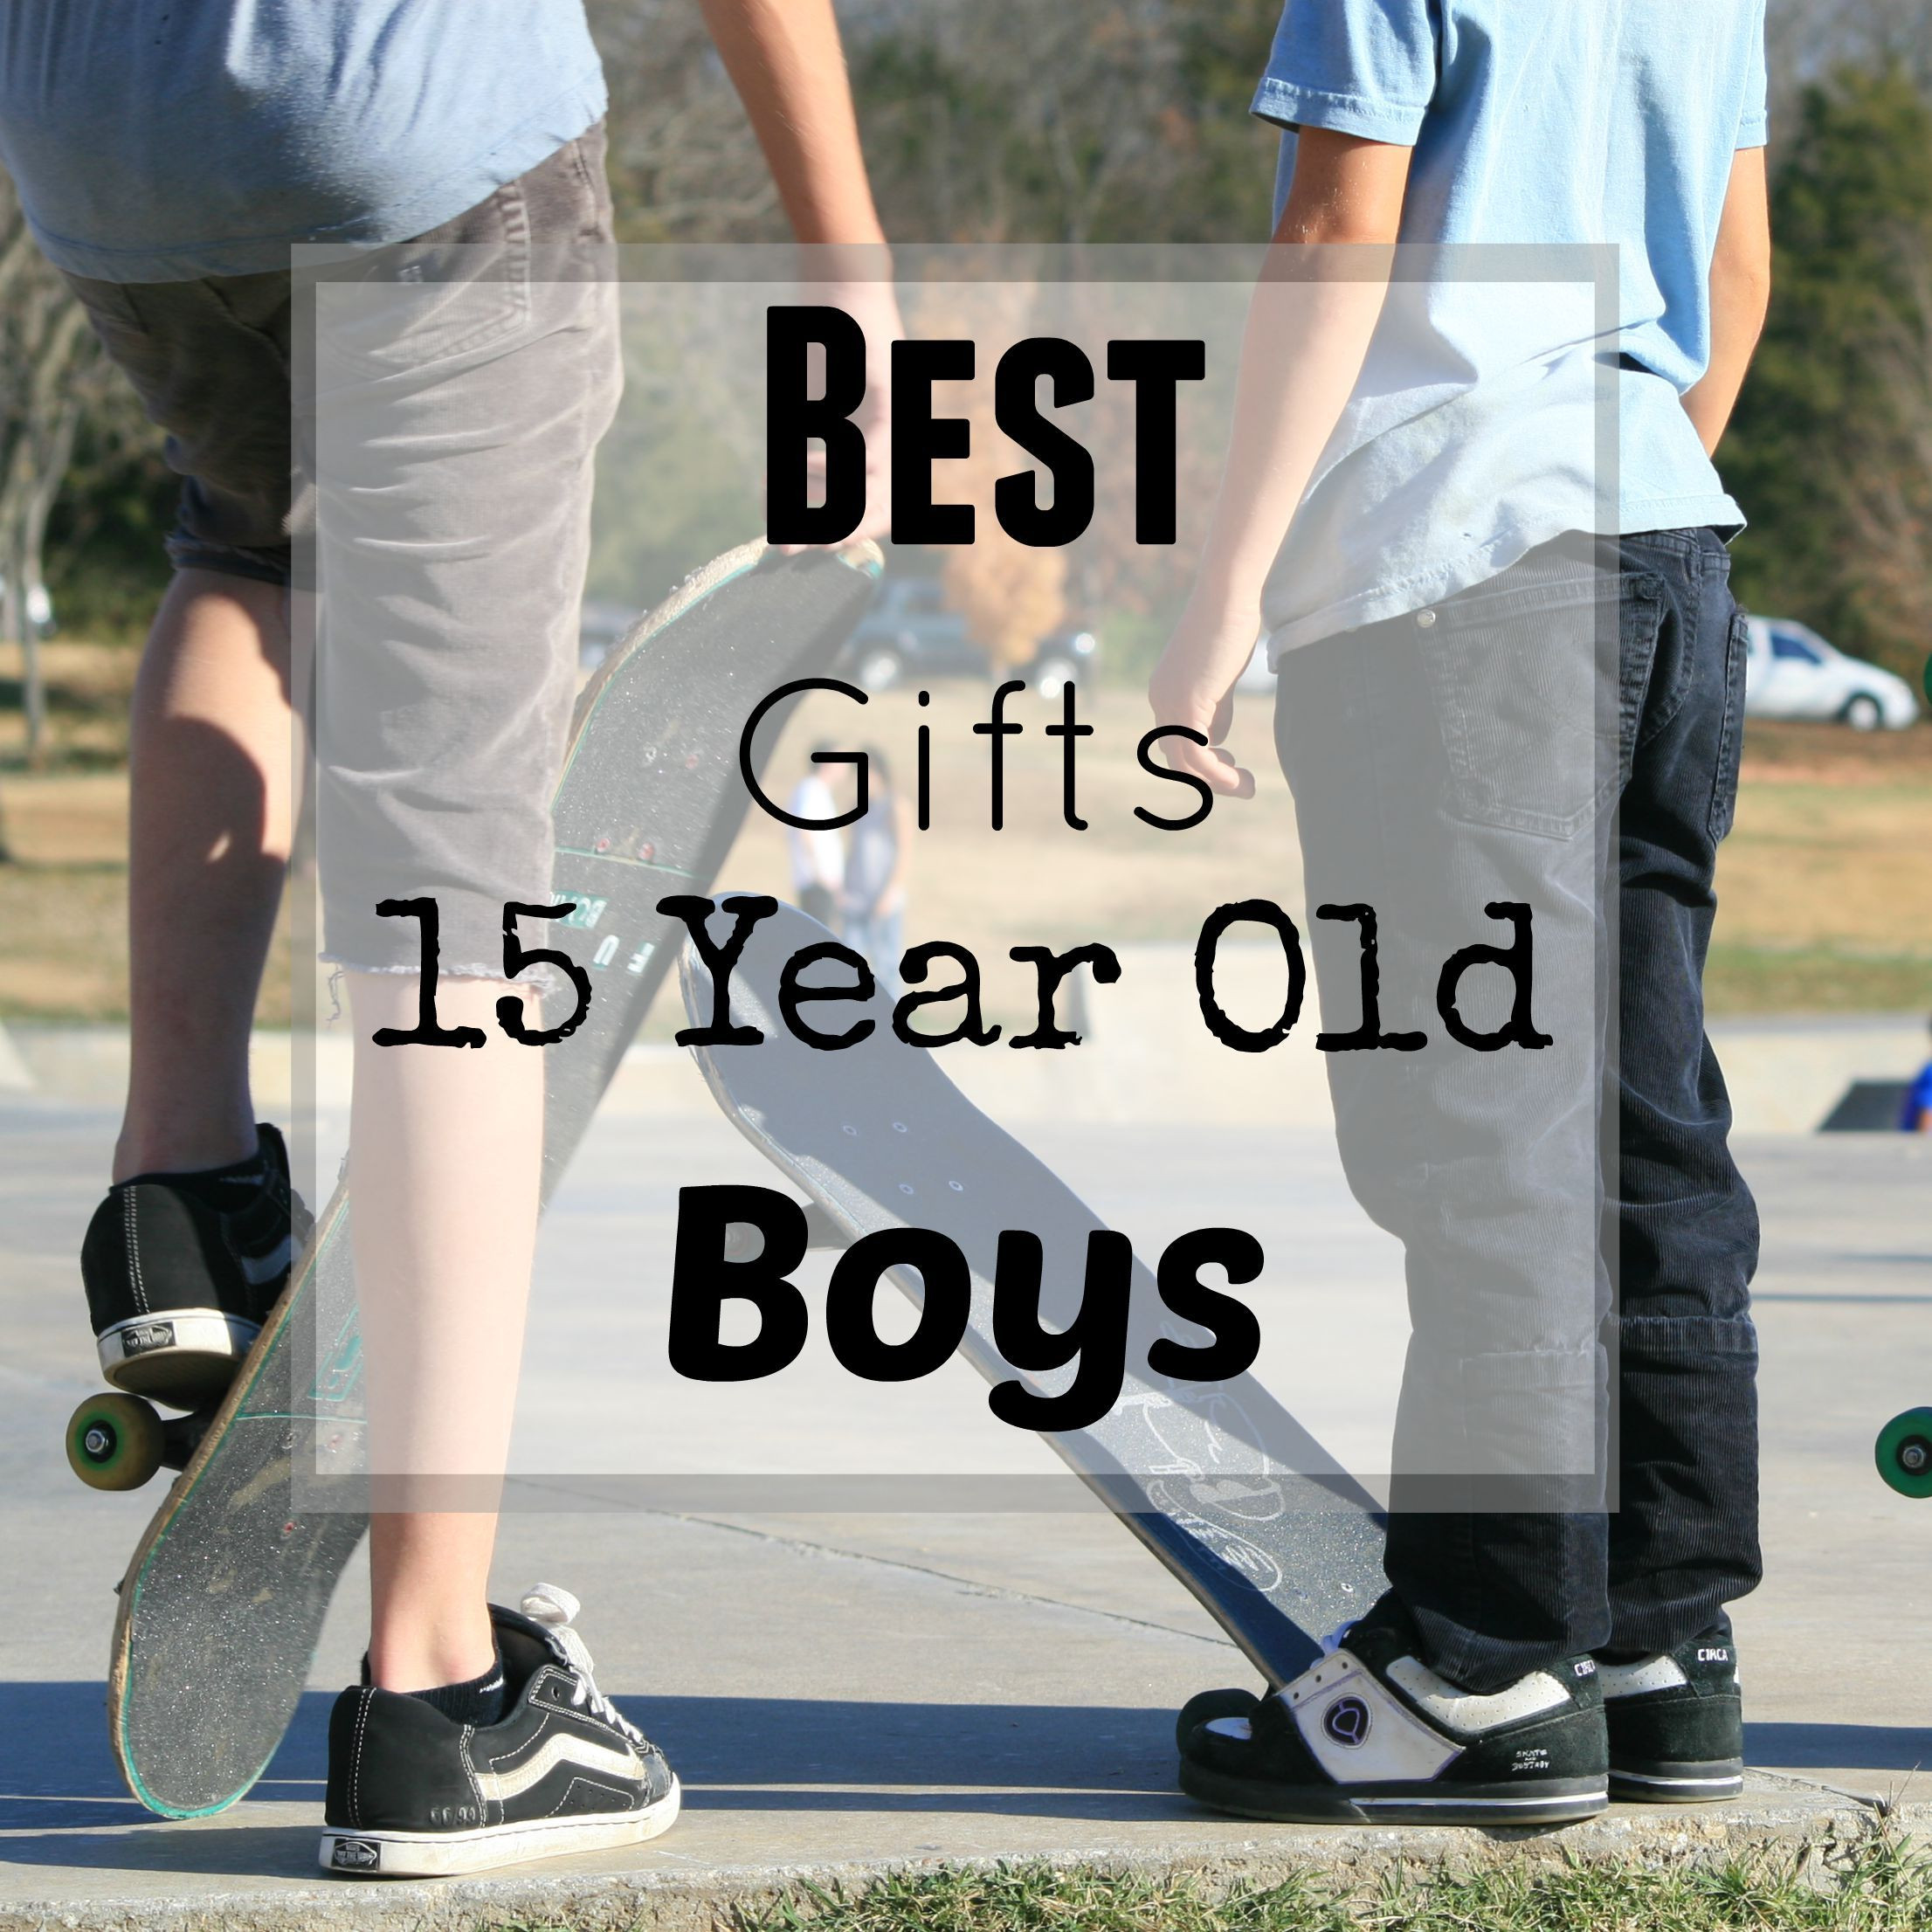 Christmas Gift Ideas 15 Year Old Boy
 Pin on Best Gifts for Teen Boys